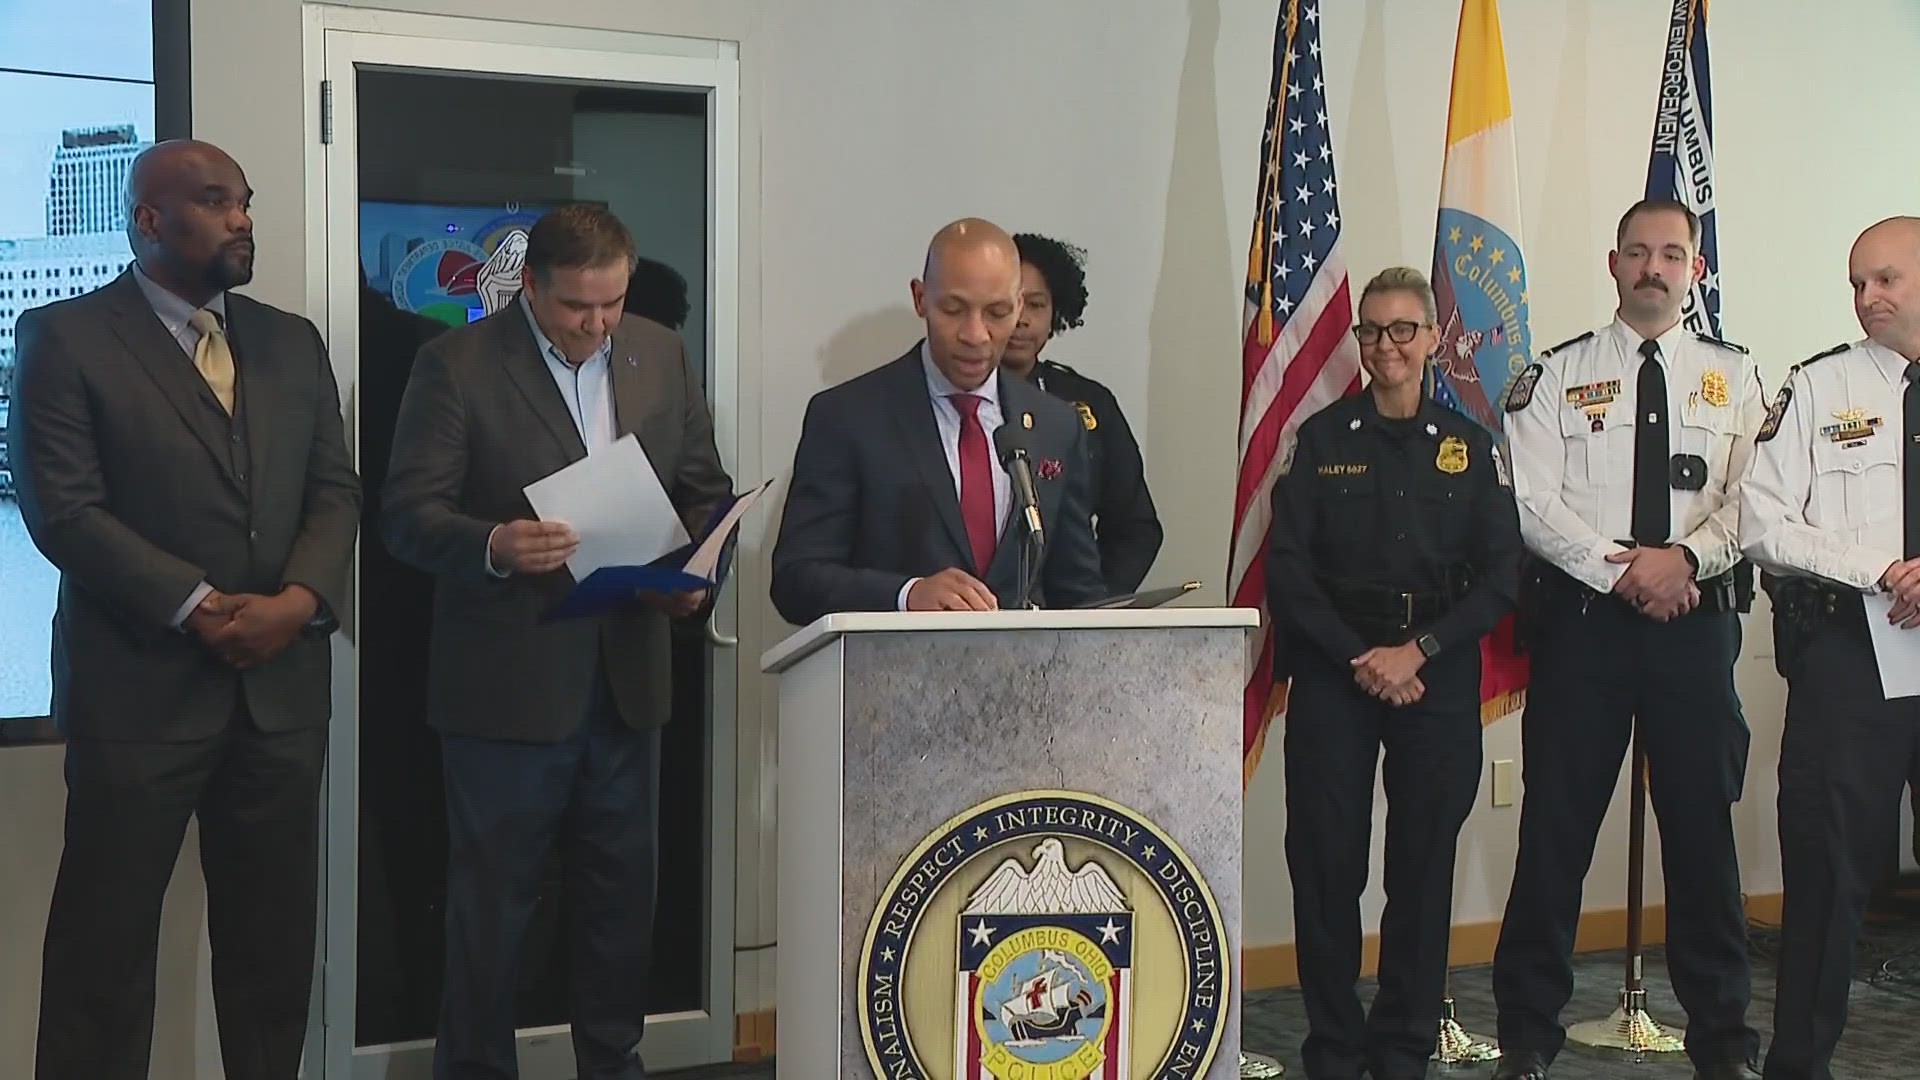 More than 50 people were arrested in Columbus as part of a federal operation that spanned multiple months to target drug crimes in the city.